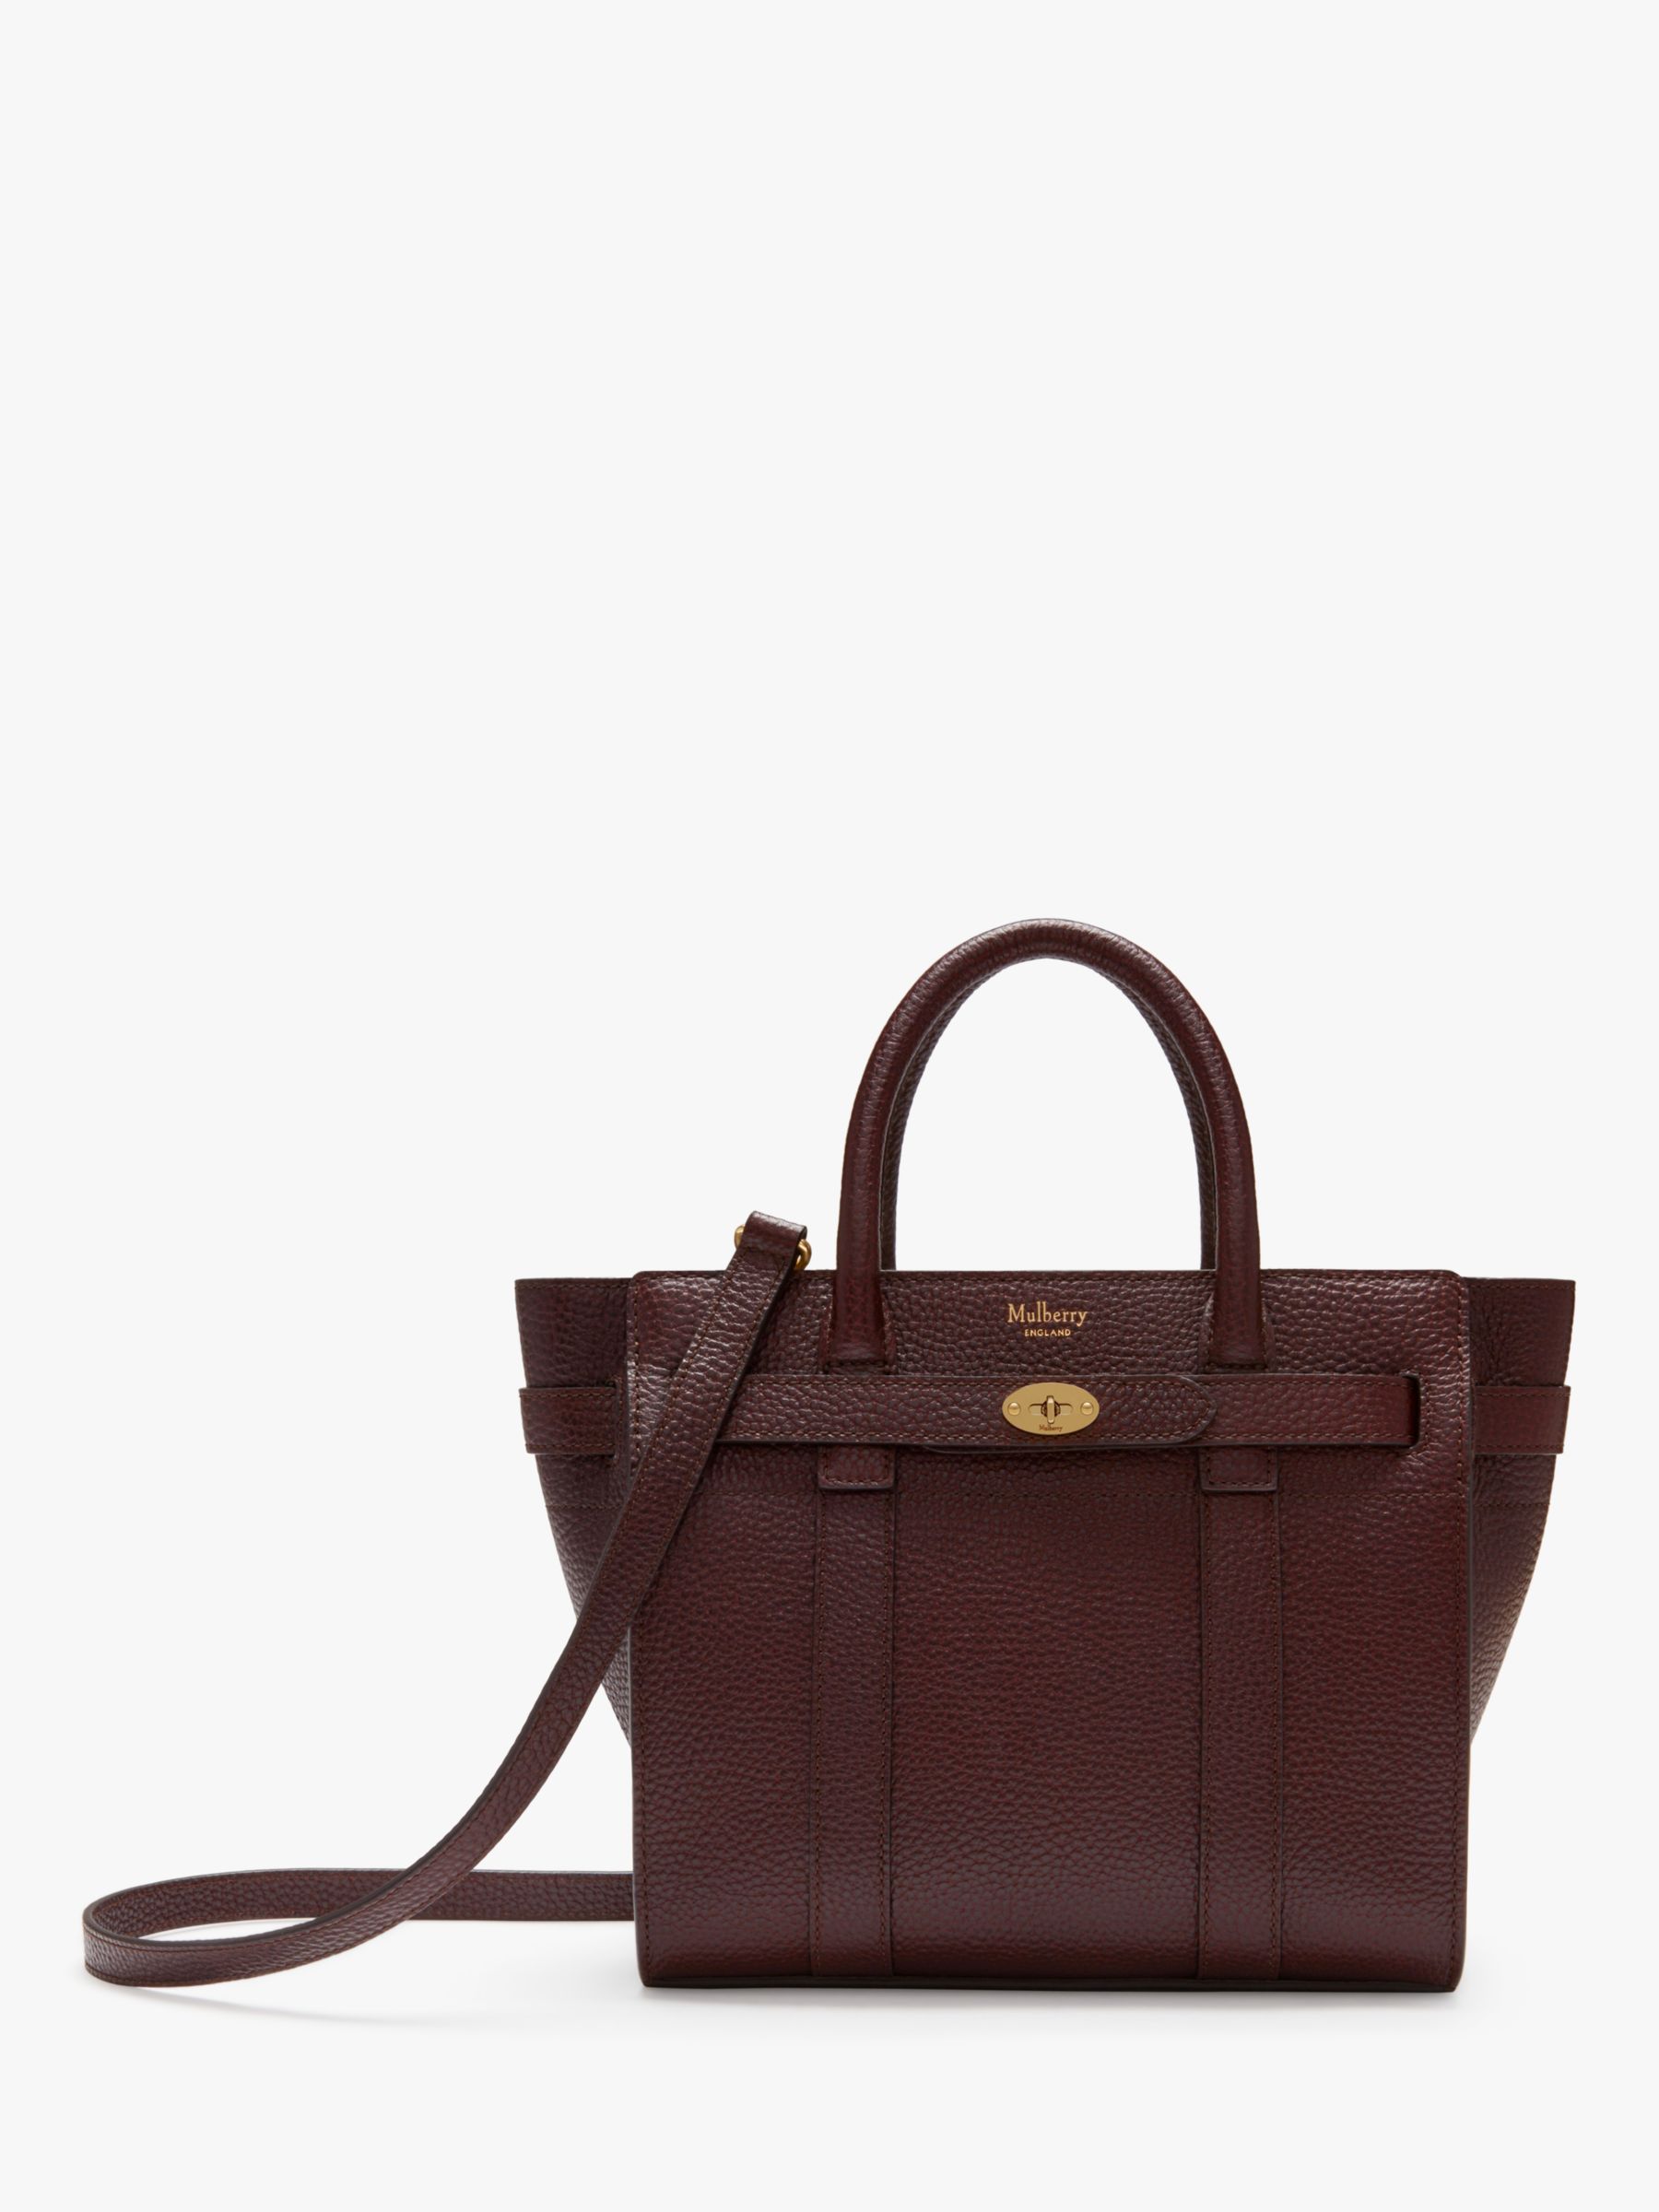 Mulberry Mini Bayswater Zipped Grain Veg Tanned Leather Tote Bag